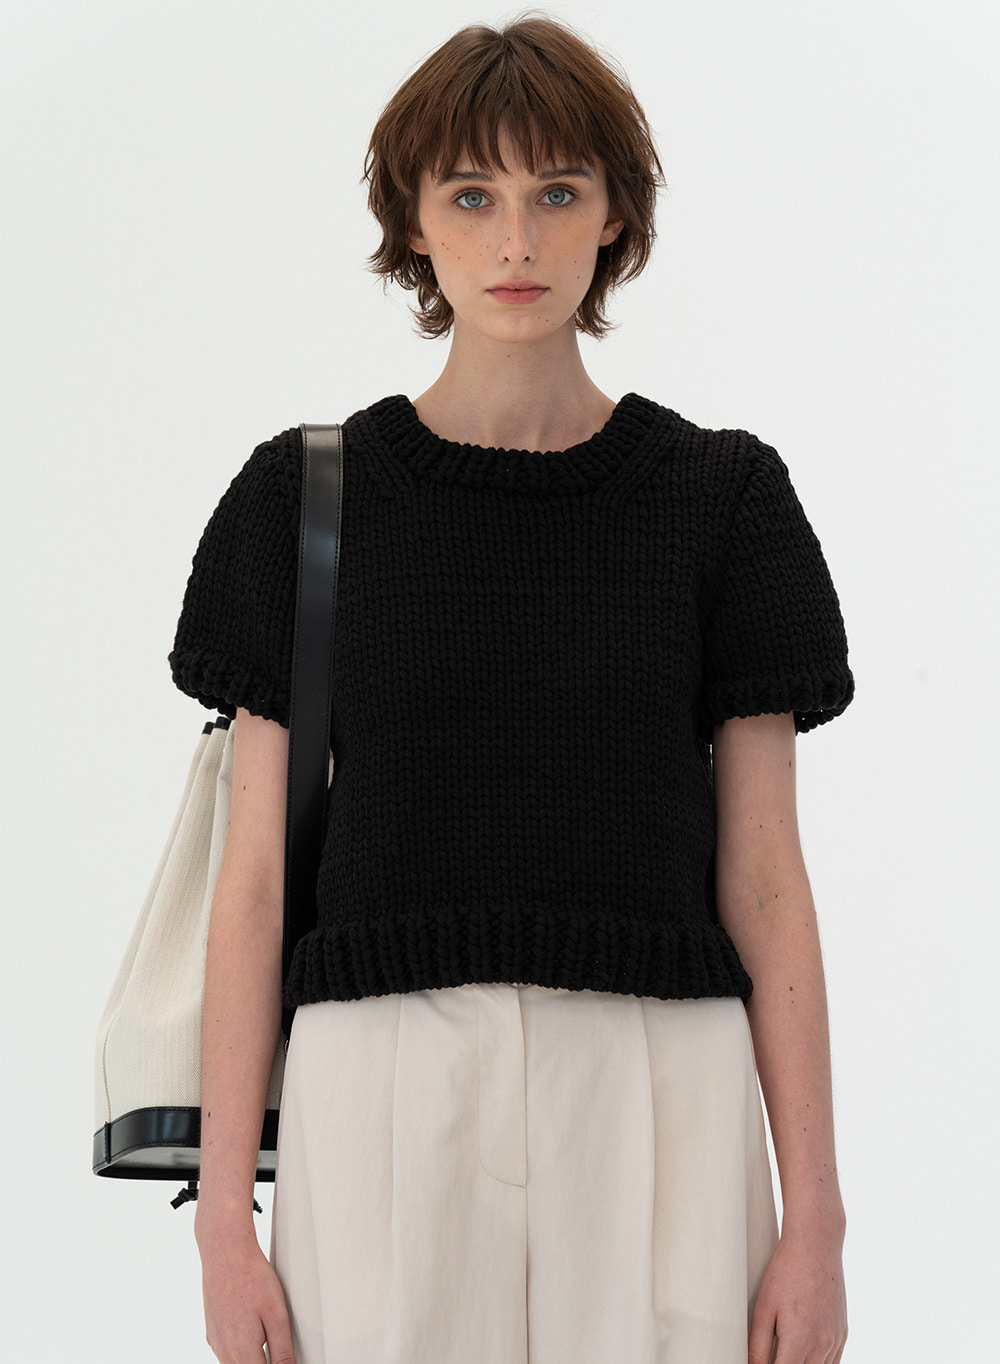 [ESSENTIAL]Hand-made Bulky Knitted Top Black